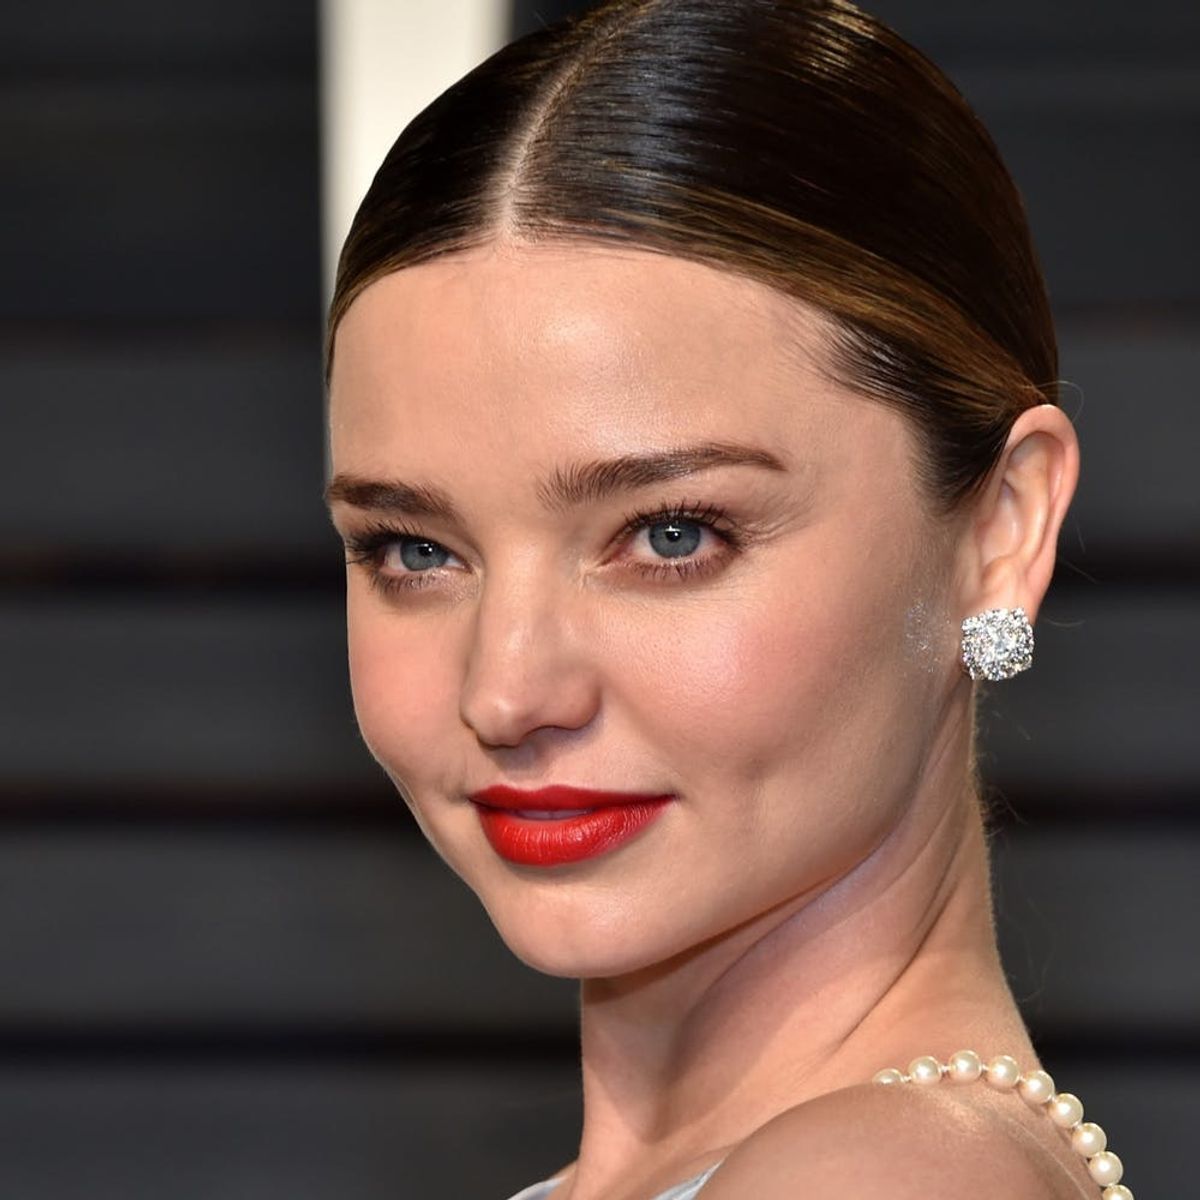 The $1.29 Million Diamond Miranda Kerr Received from an Ex Is Reportedly Under Investigation by the Feds